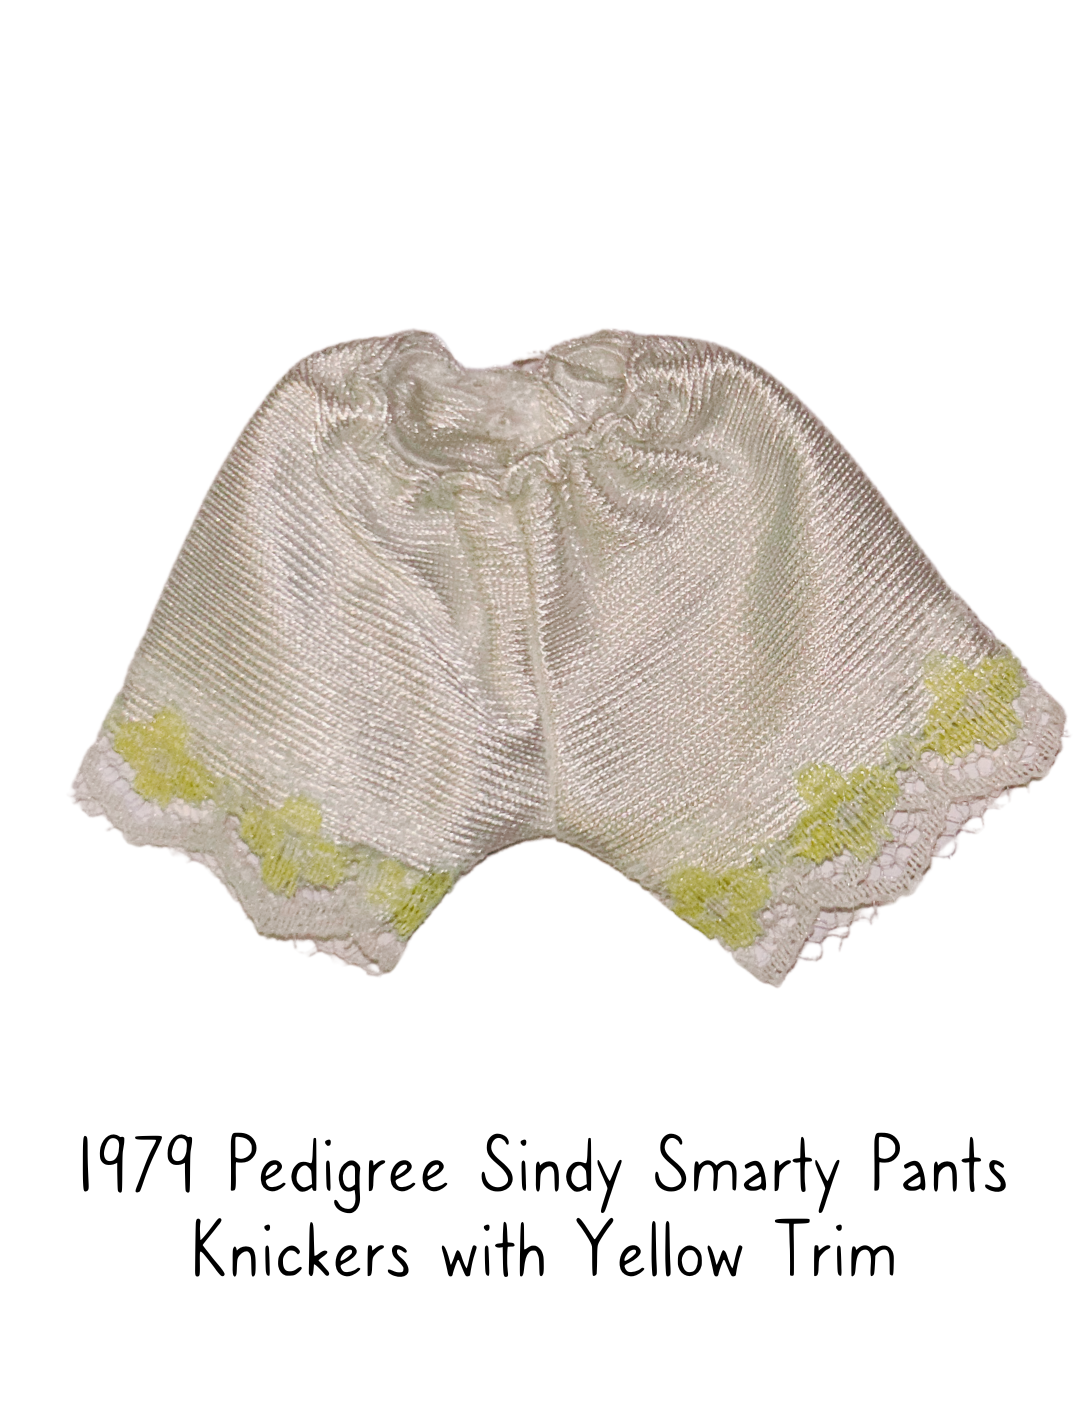 1979 Pedigree Sindy Smarty Pants Knickers with Yellow Trim